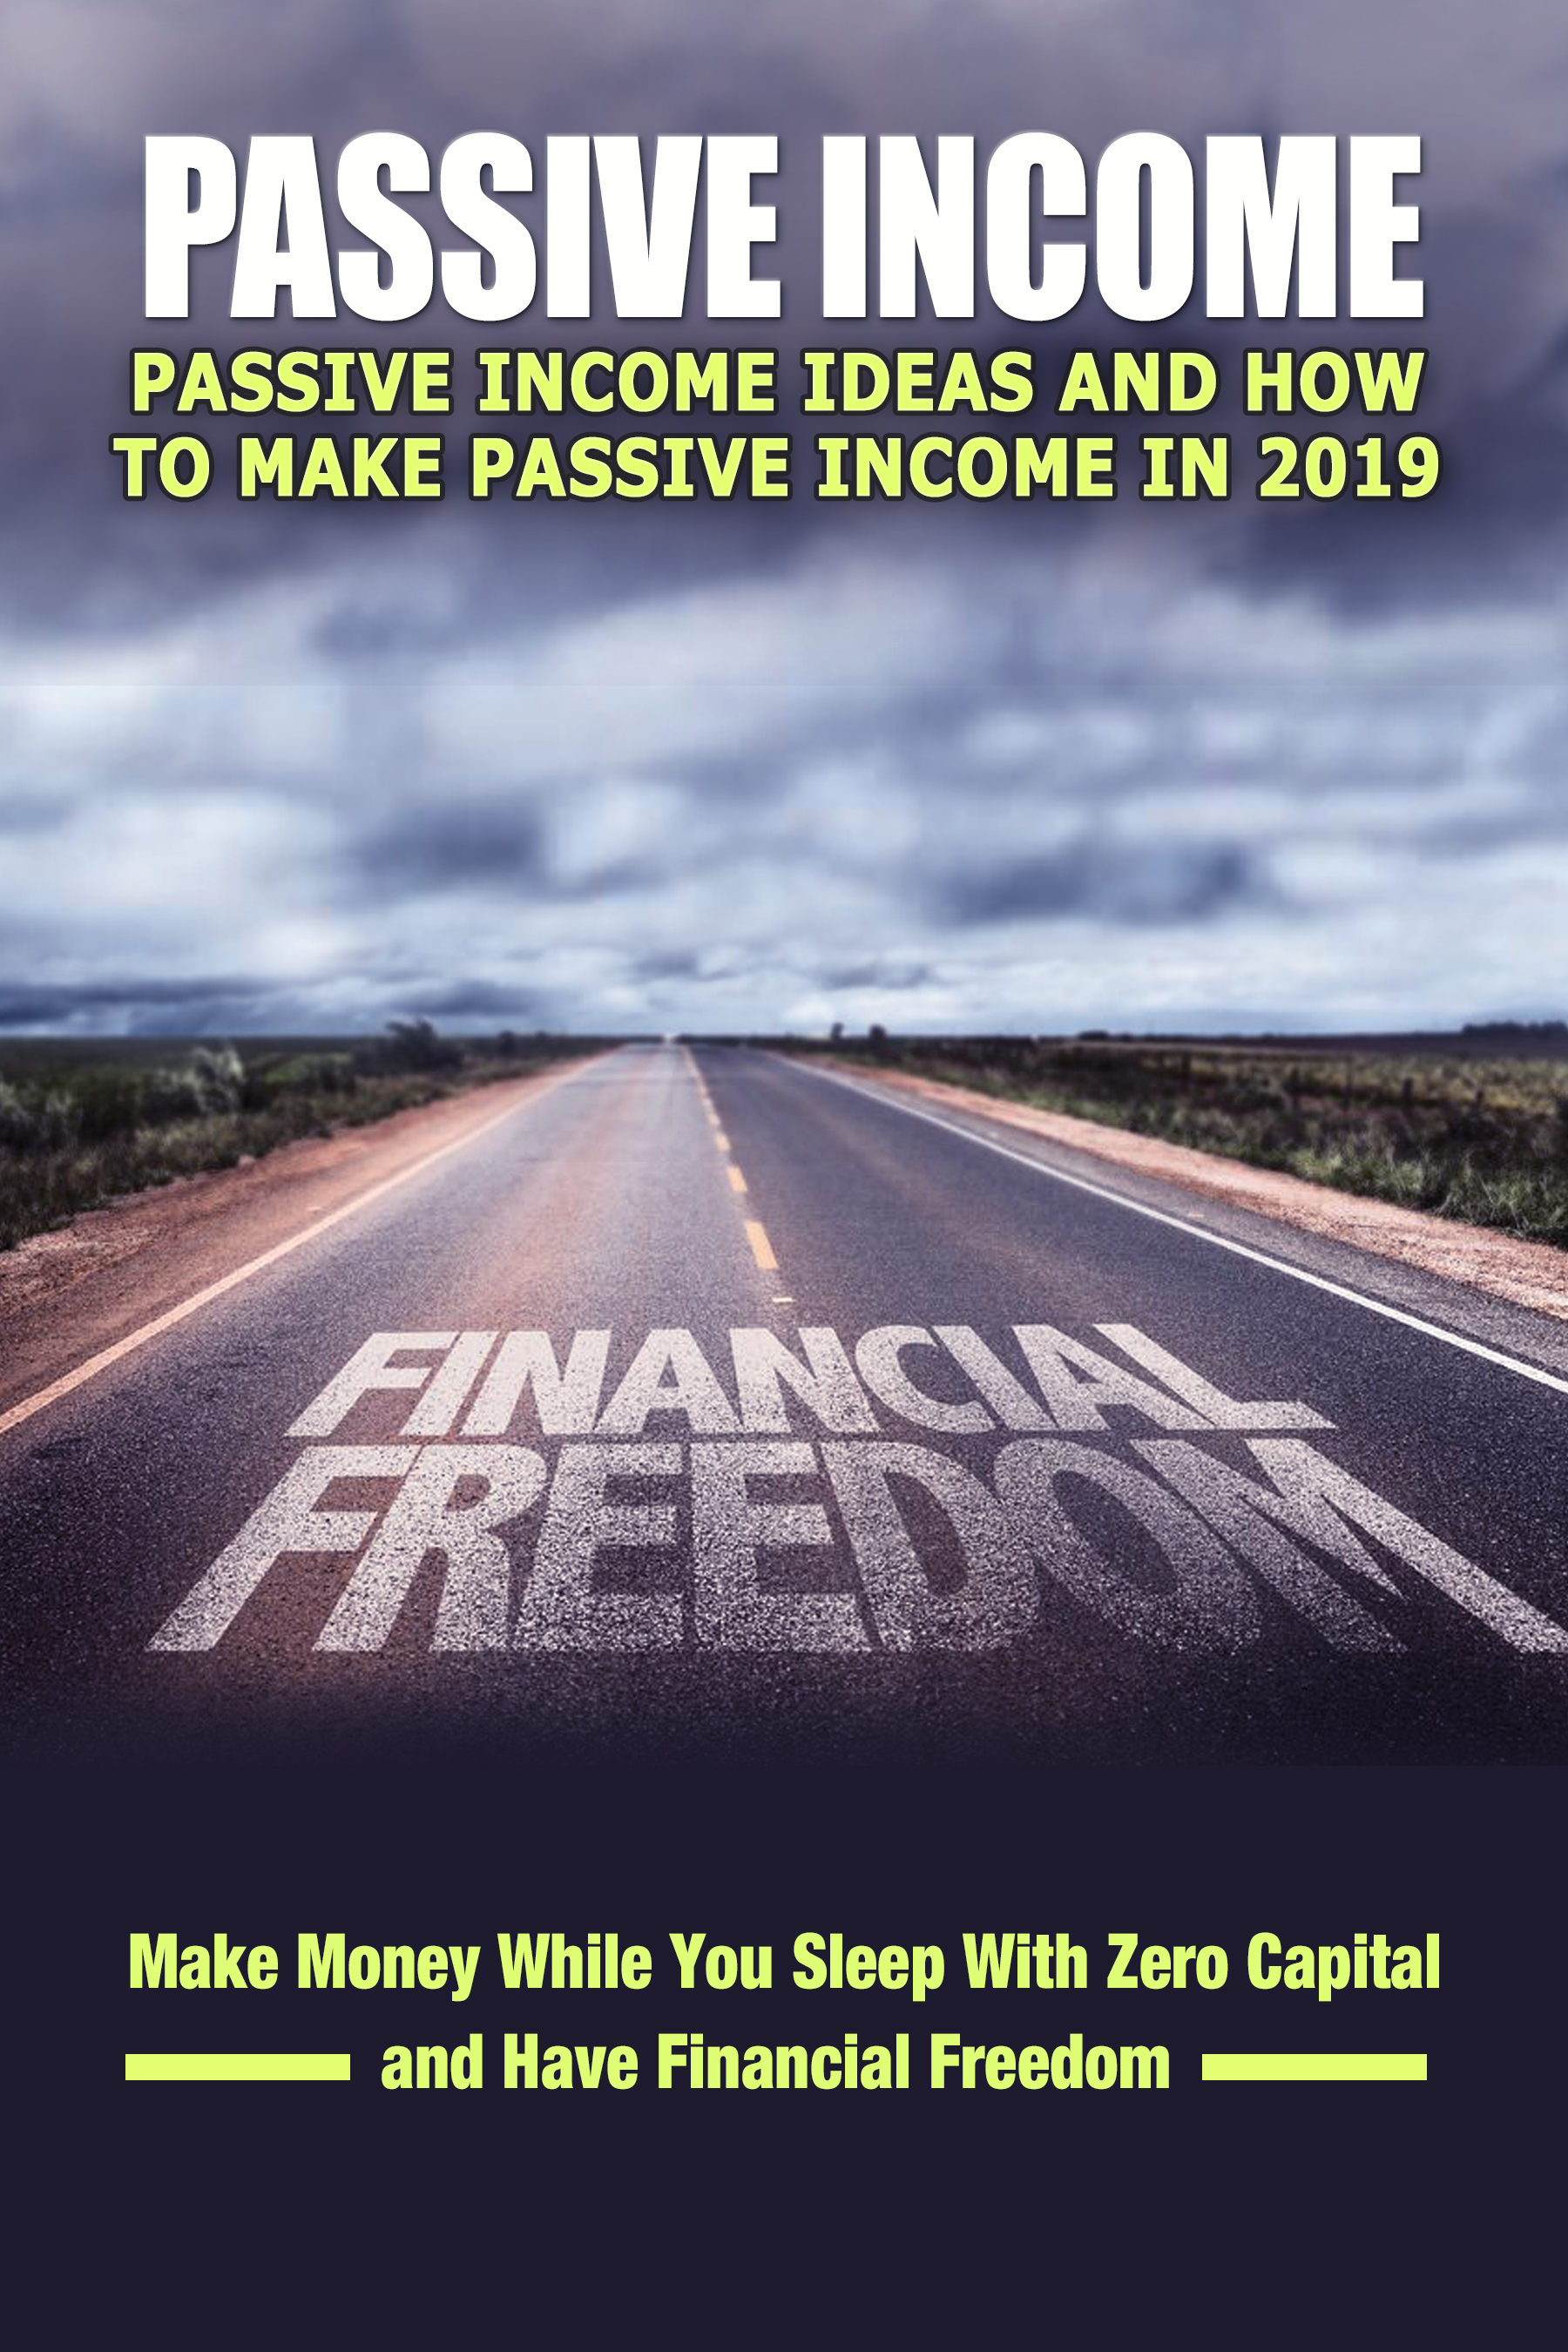 FREE: Passive Income: Ideas You Can Get Started On Today To Make Passive Income: Make Money While You Sleep With Zero Capital and Have Financial Freedom by Alaric Meyer